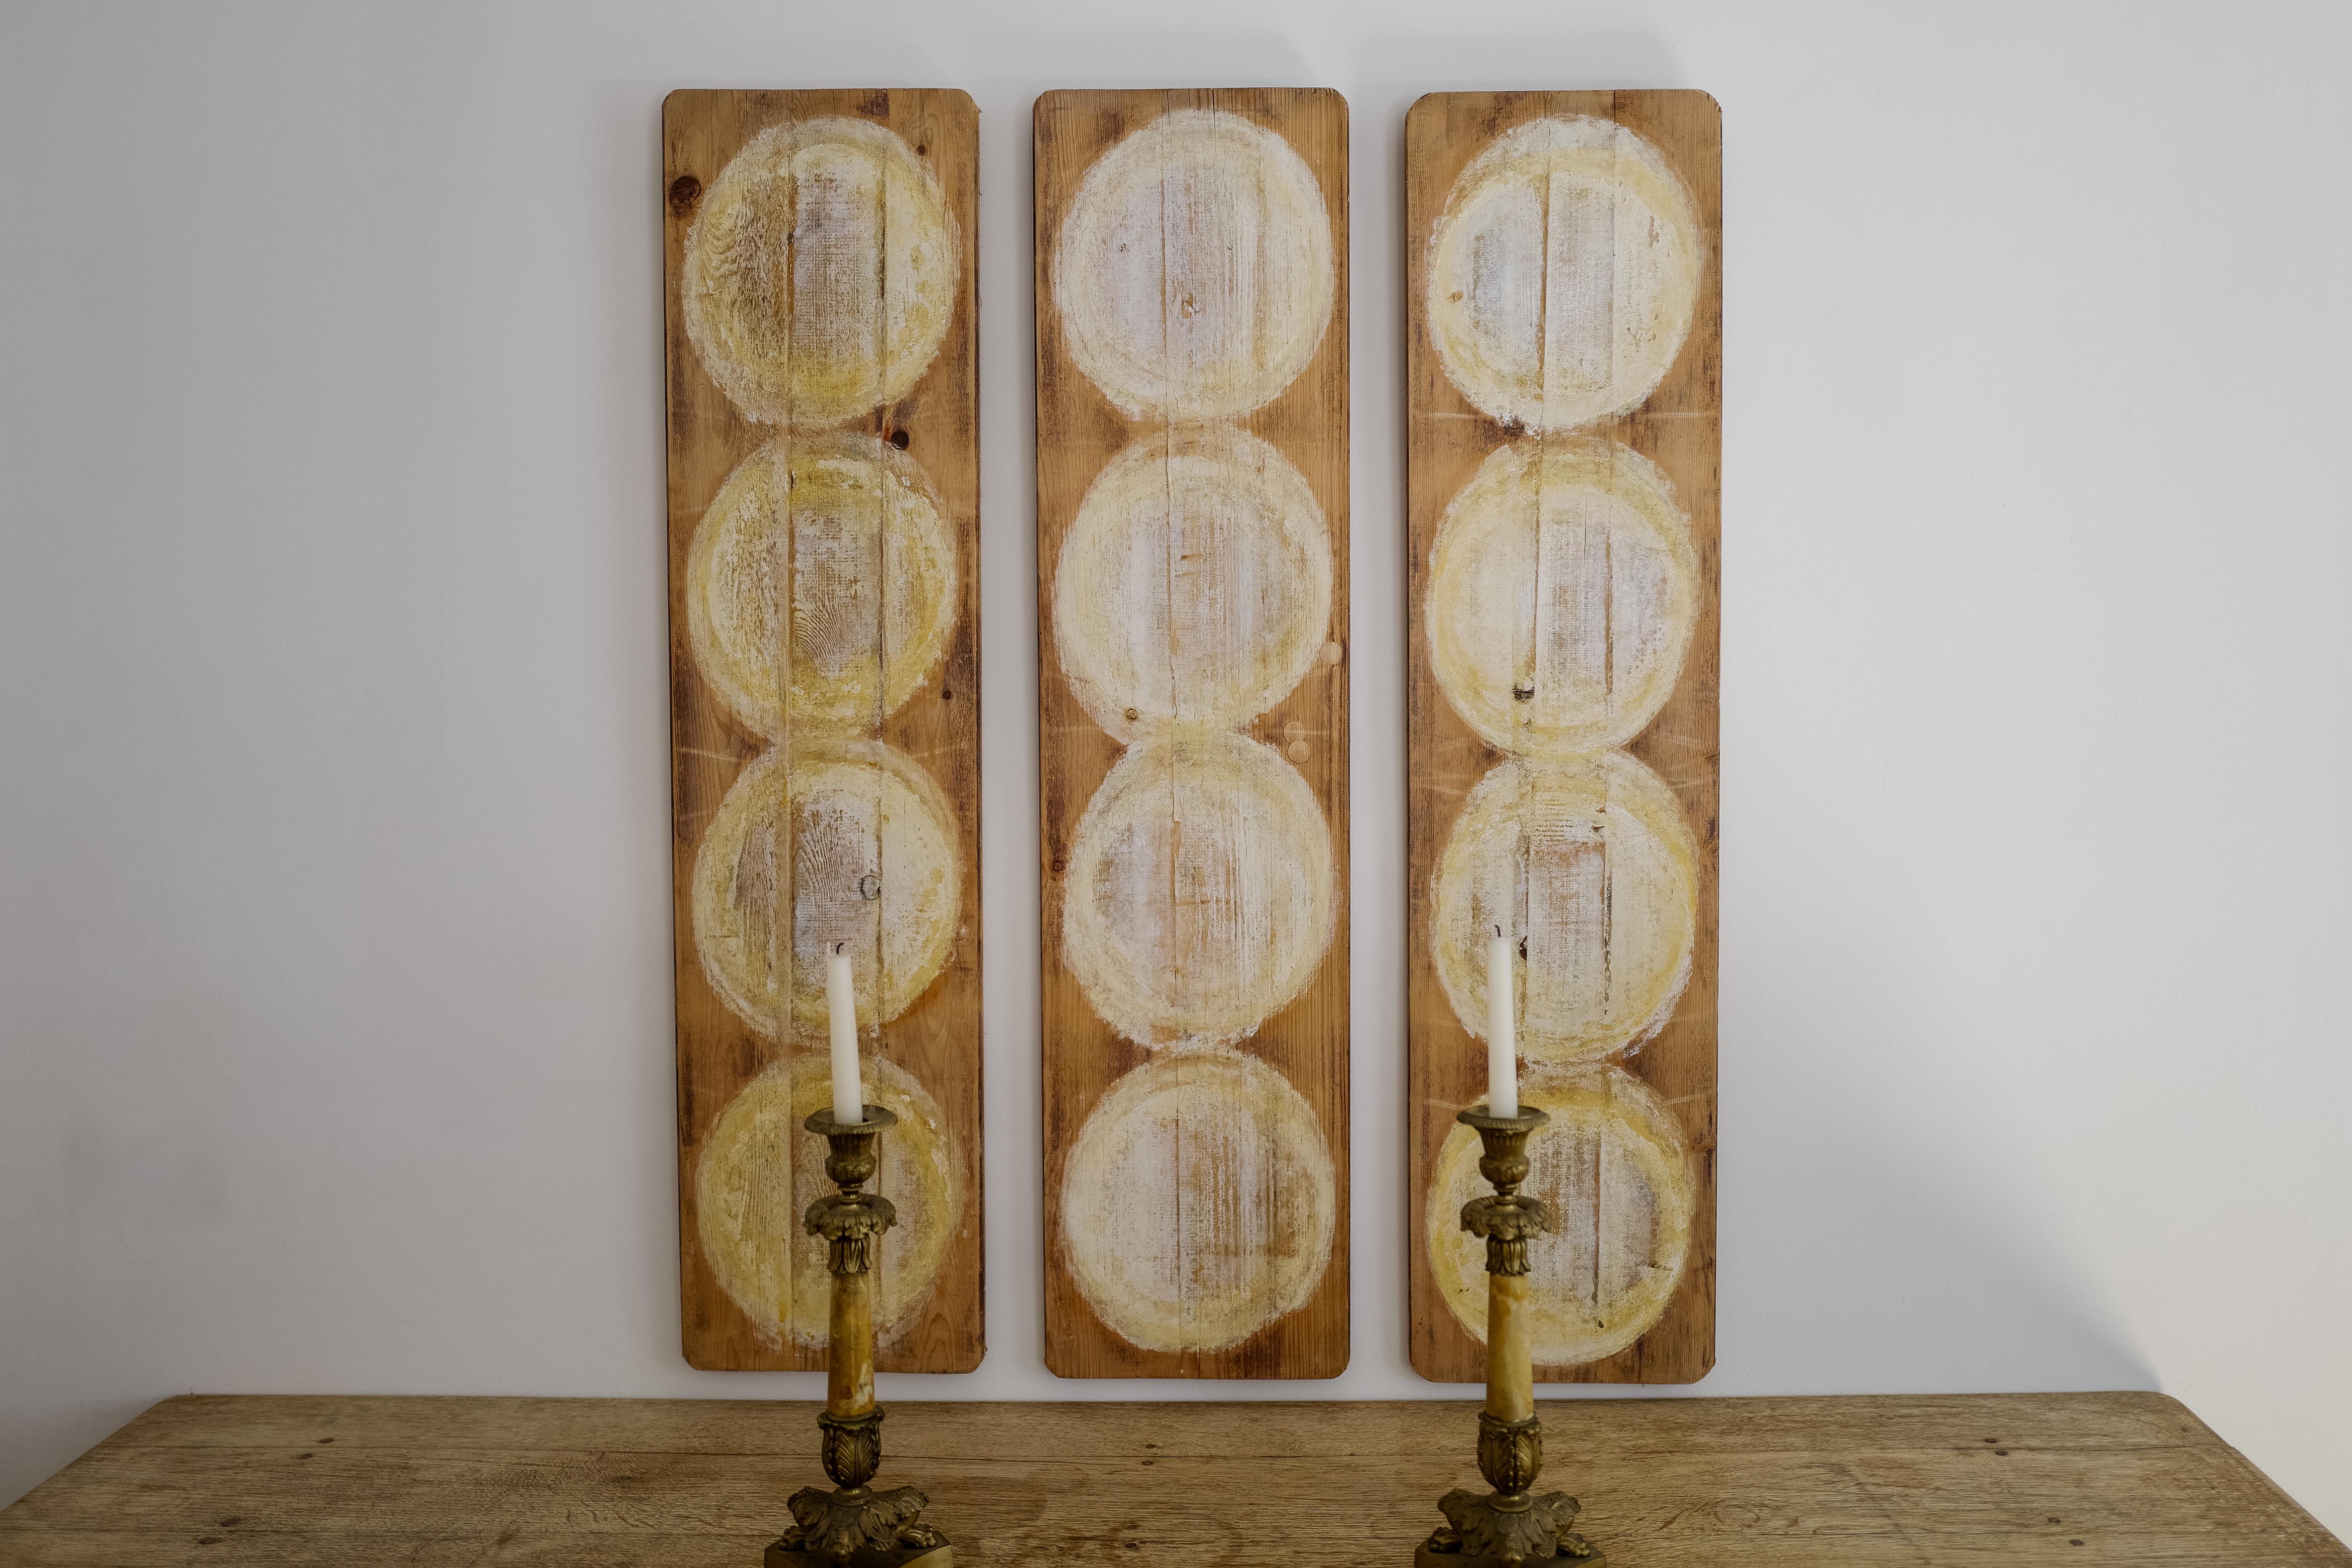 A unique conversational art piece. Originally used in France as boards to hold fromage which have been stained overtime. What is left is beautiful yellow tone circles stained into reclaimed pine wood. Both sides are stained from the cheese. This is